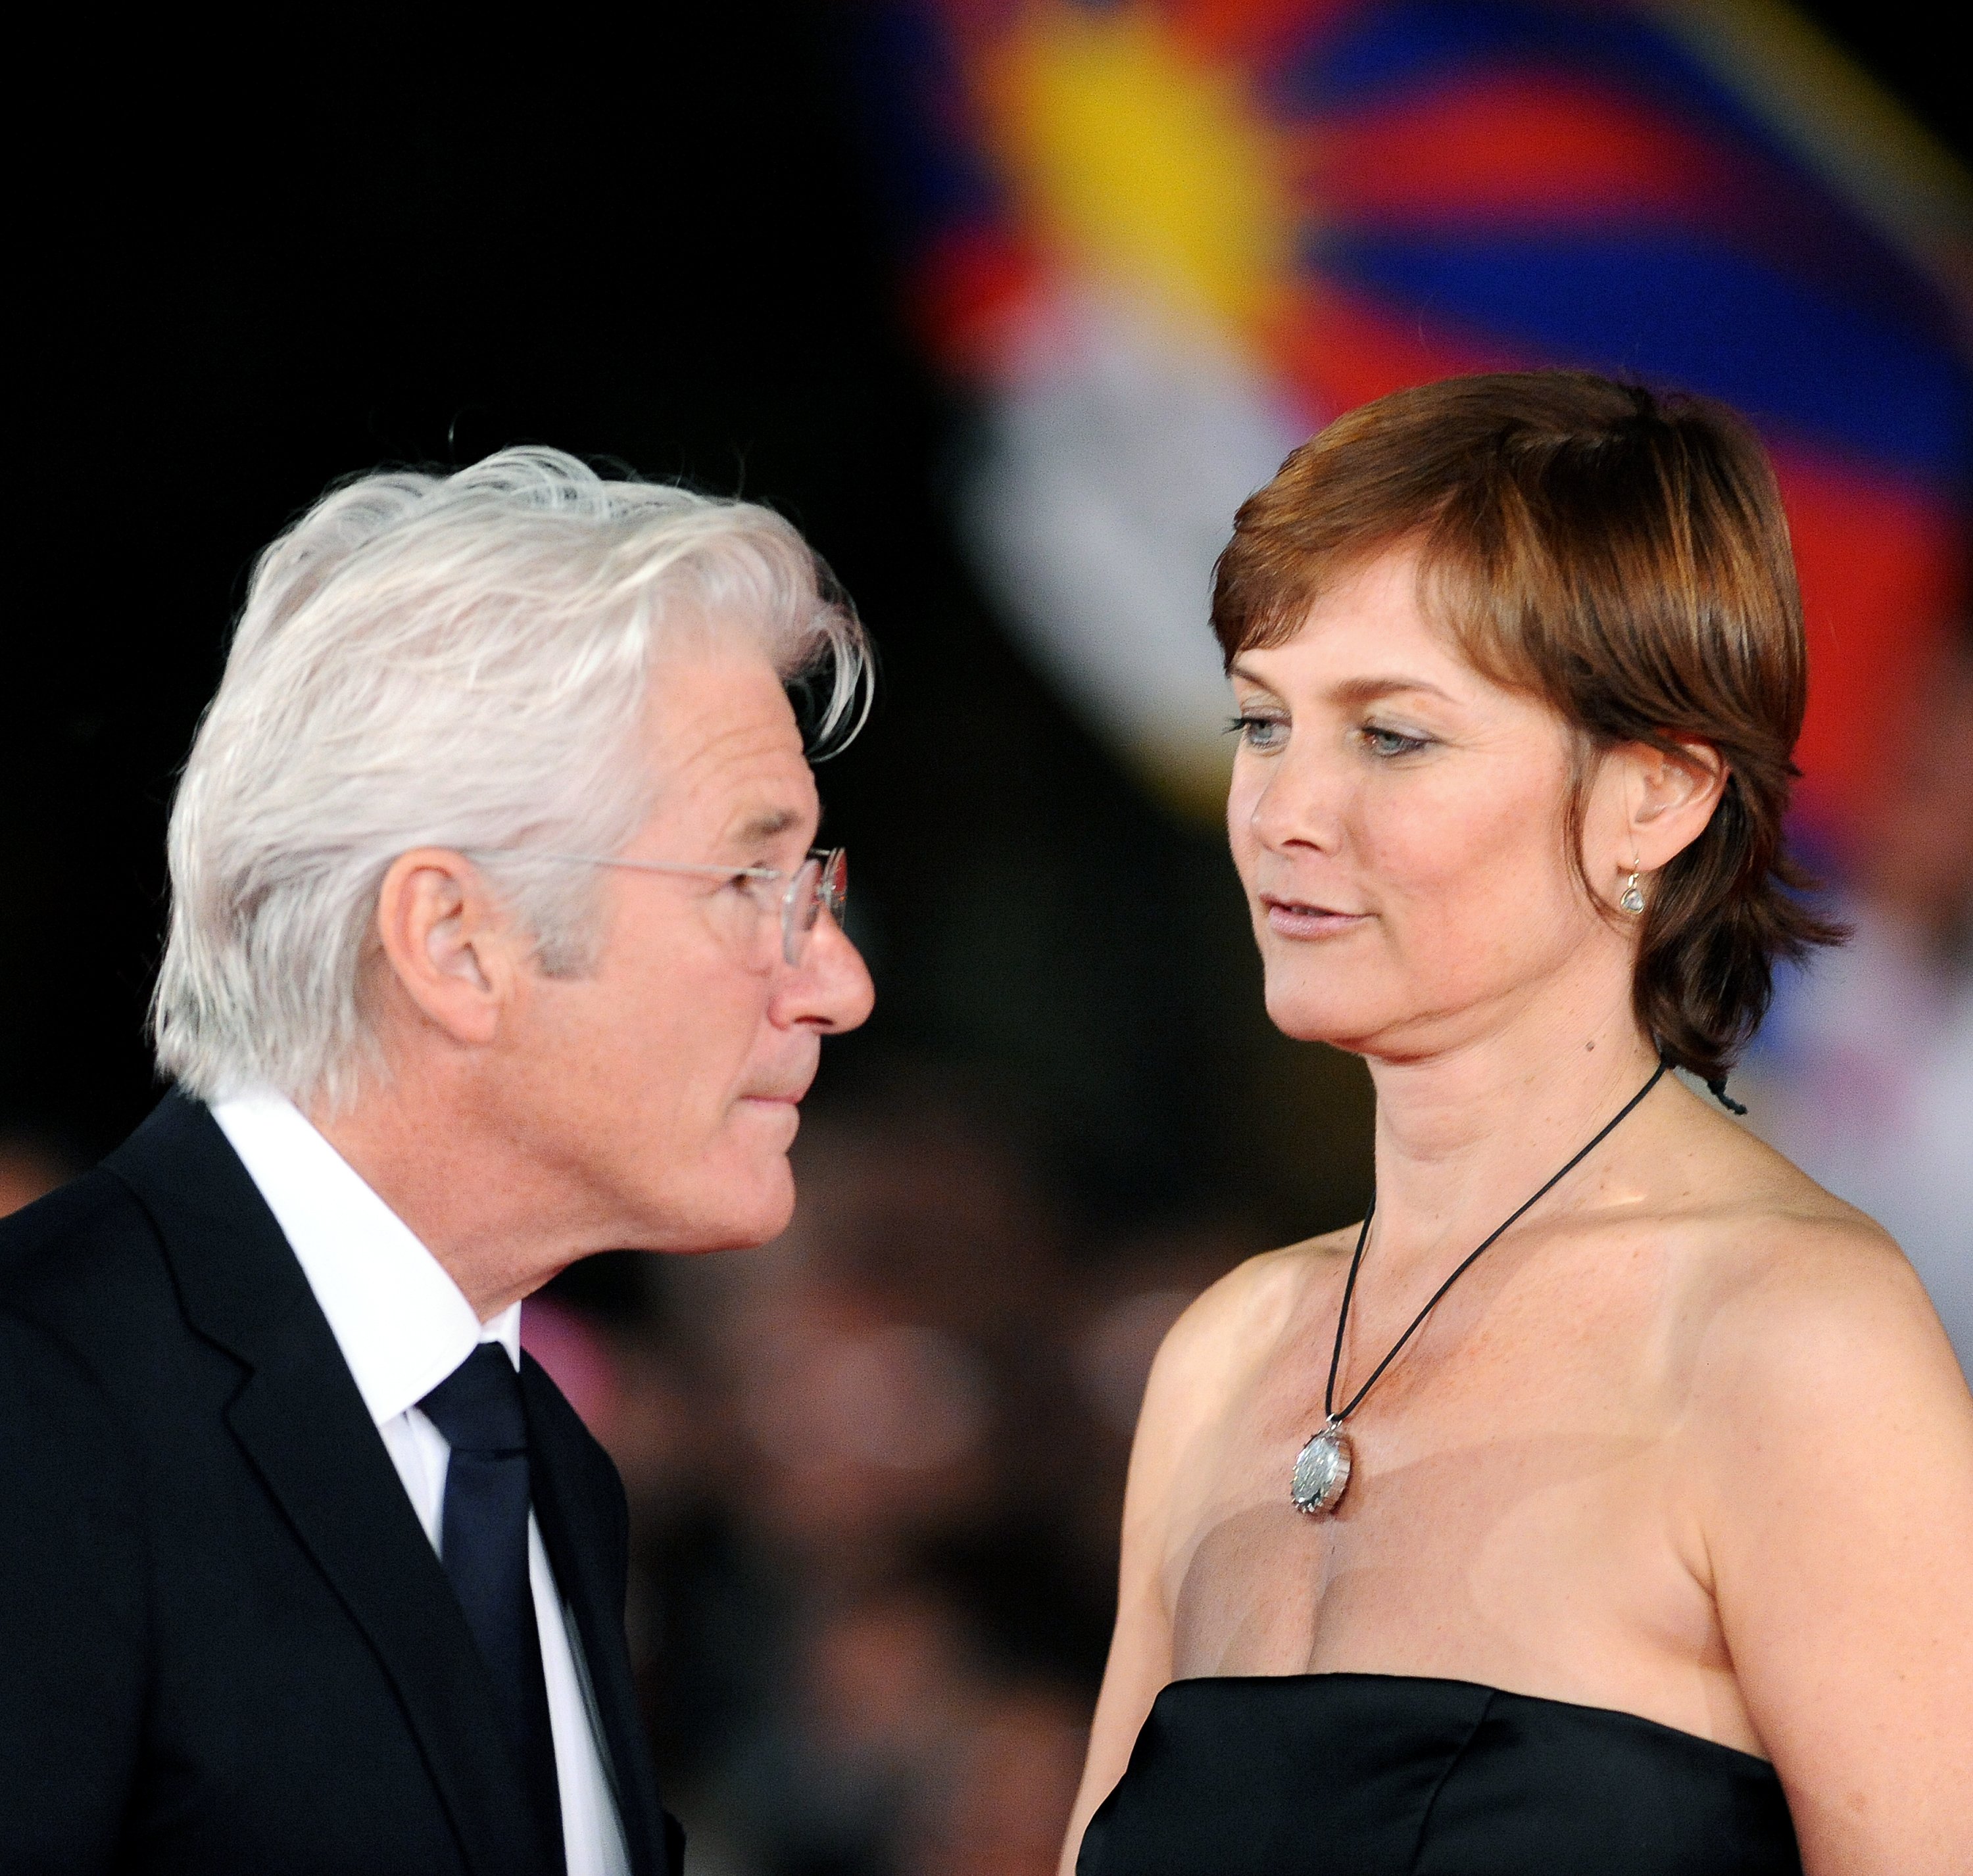 Richard Gere and Carey Lowell in Rome Italy in 2011. | Source: Getty Images